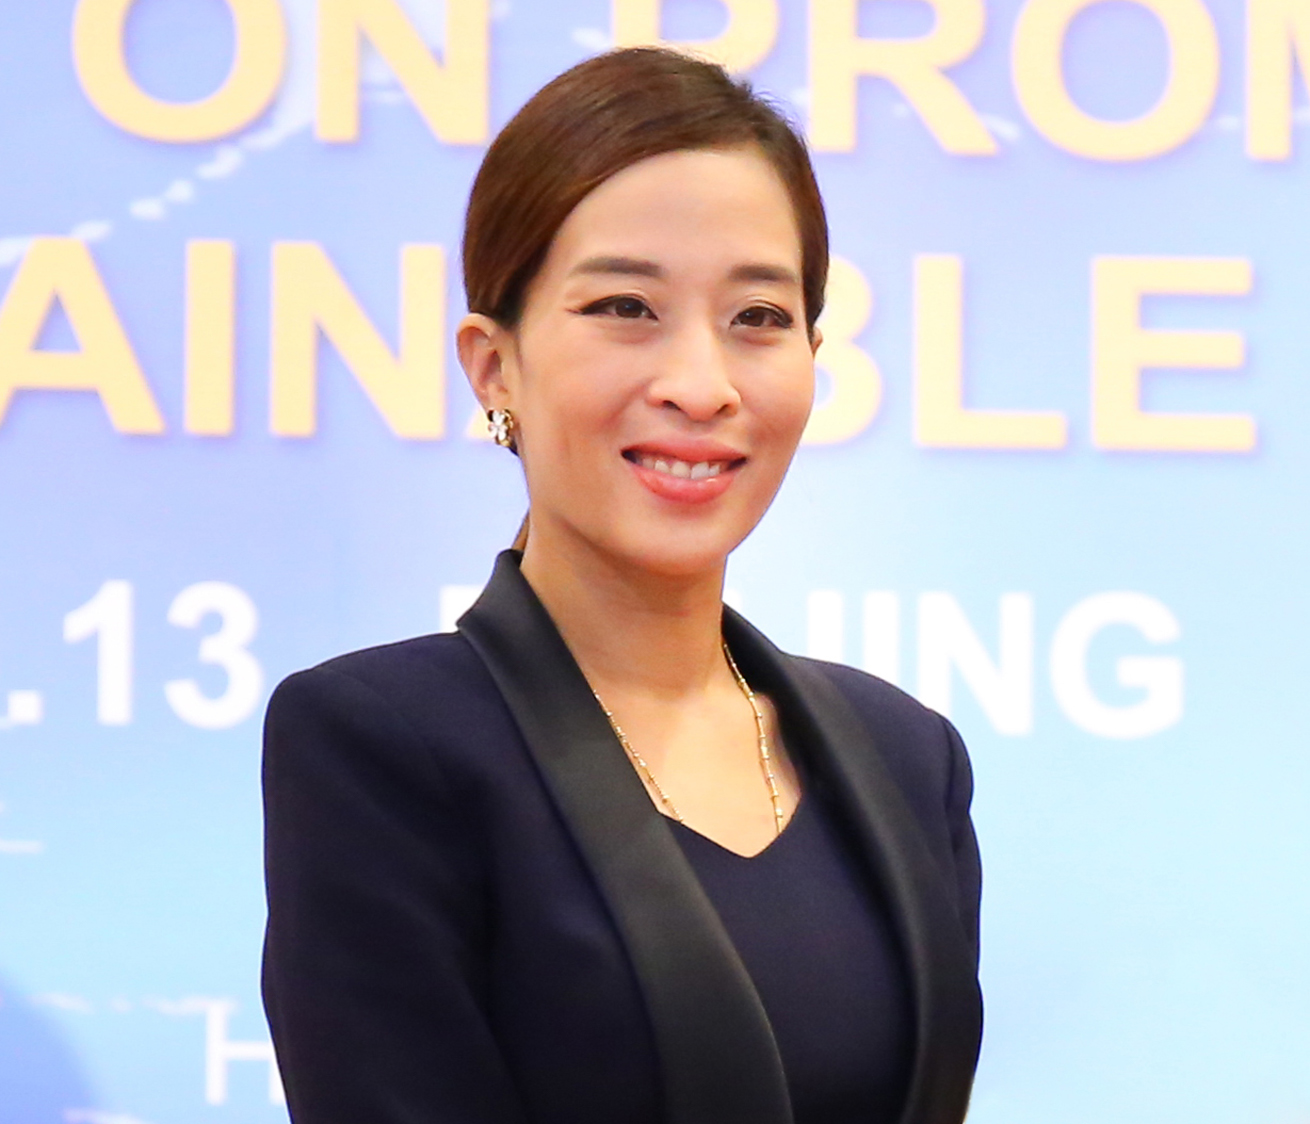 UNODC Goodwill Ambassador for the Rule of Law in Southeast Asia Her Royal  Highness Princess Bajrakitiyabha Mahidol of Thailand